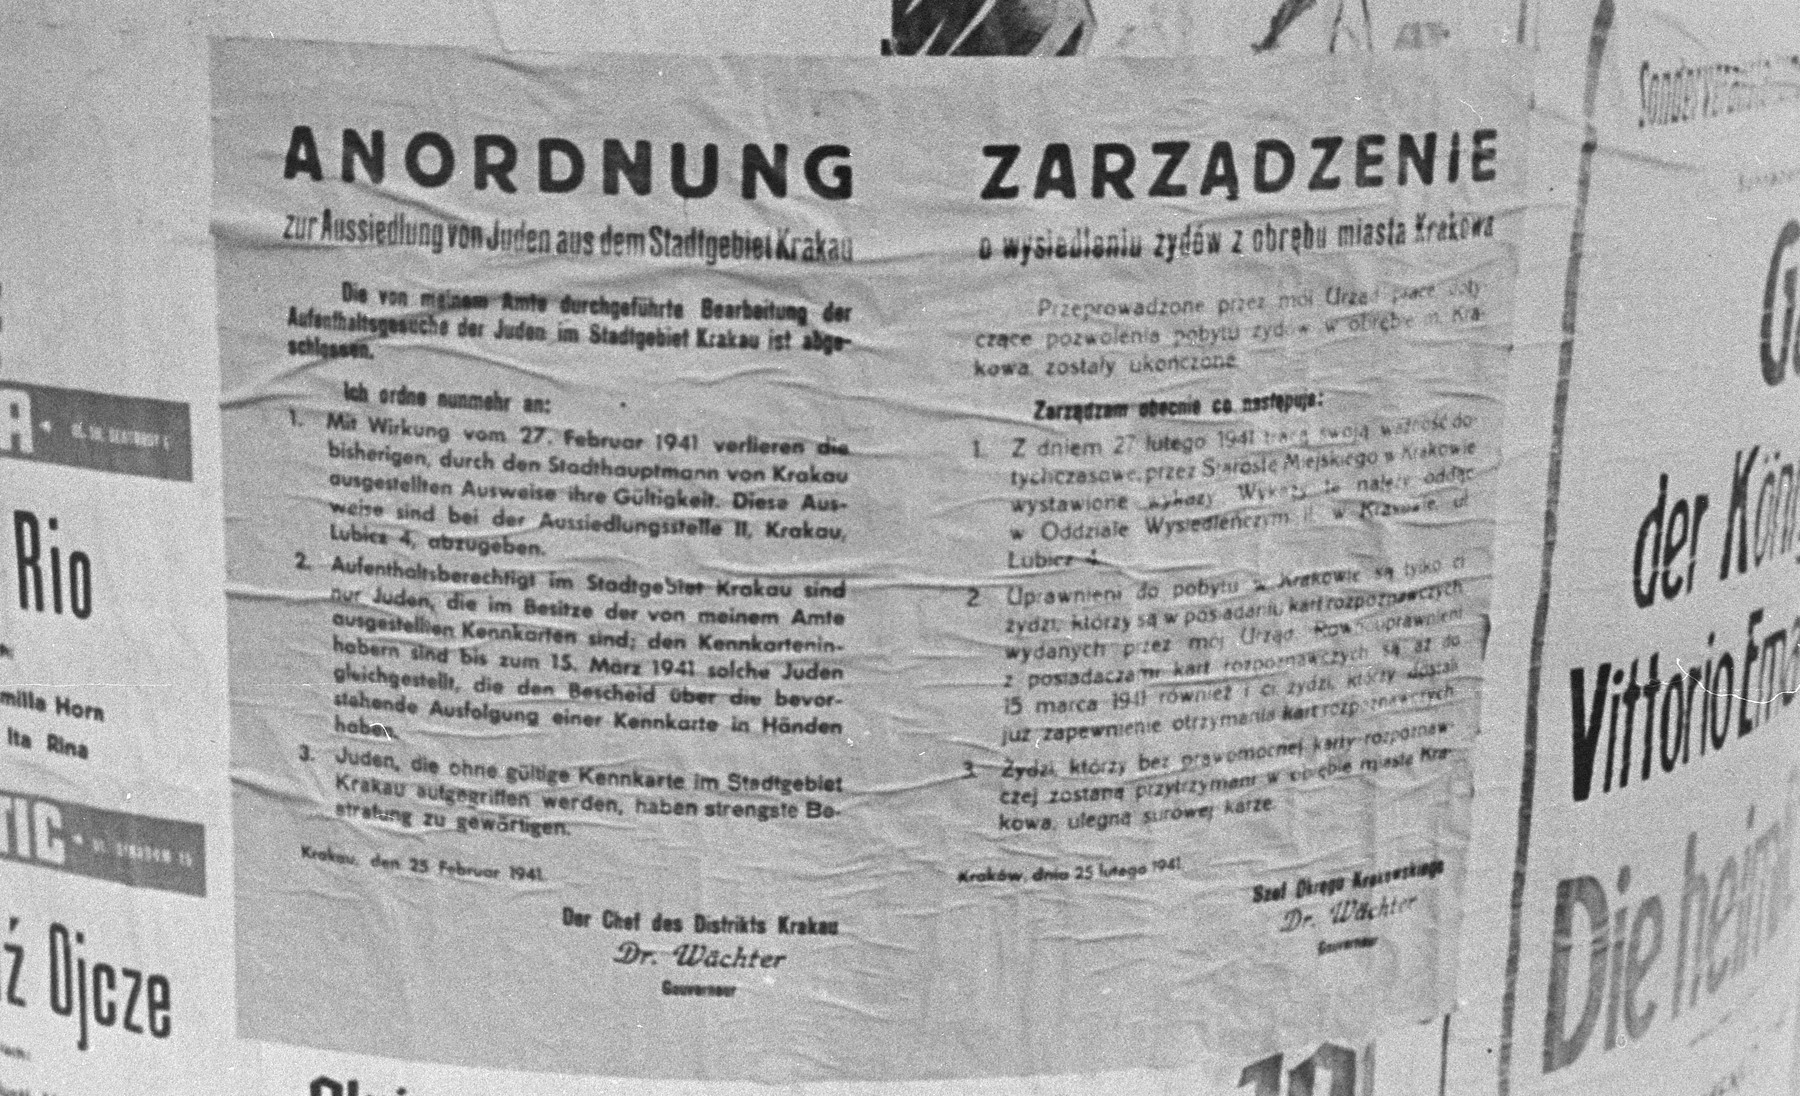 Close-up of an announcement affixed to a city kiosk, ordering the resettlement of Jews from the city of Krakow, signed by district chief, Dr. Wachter.